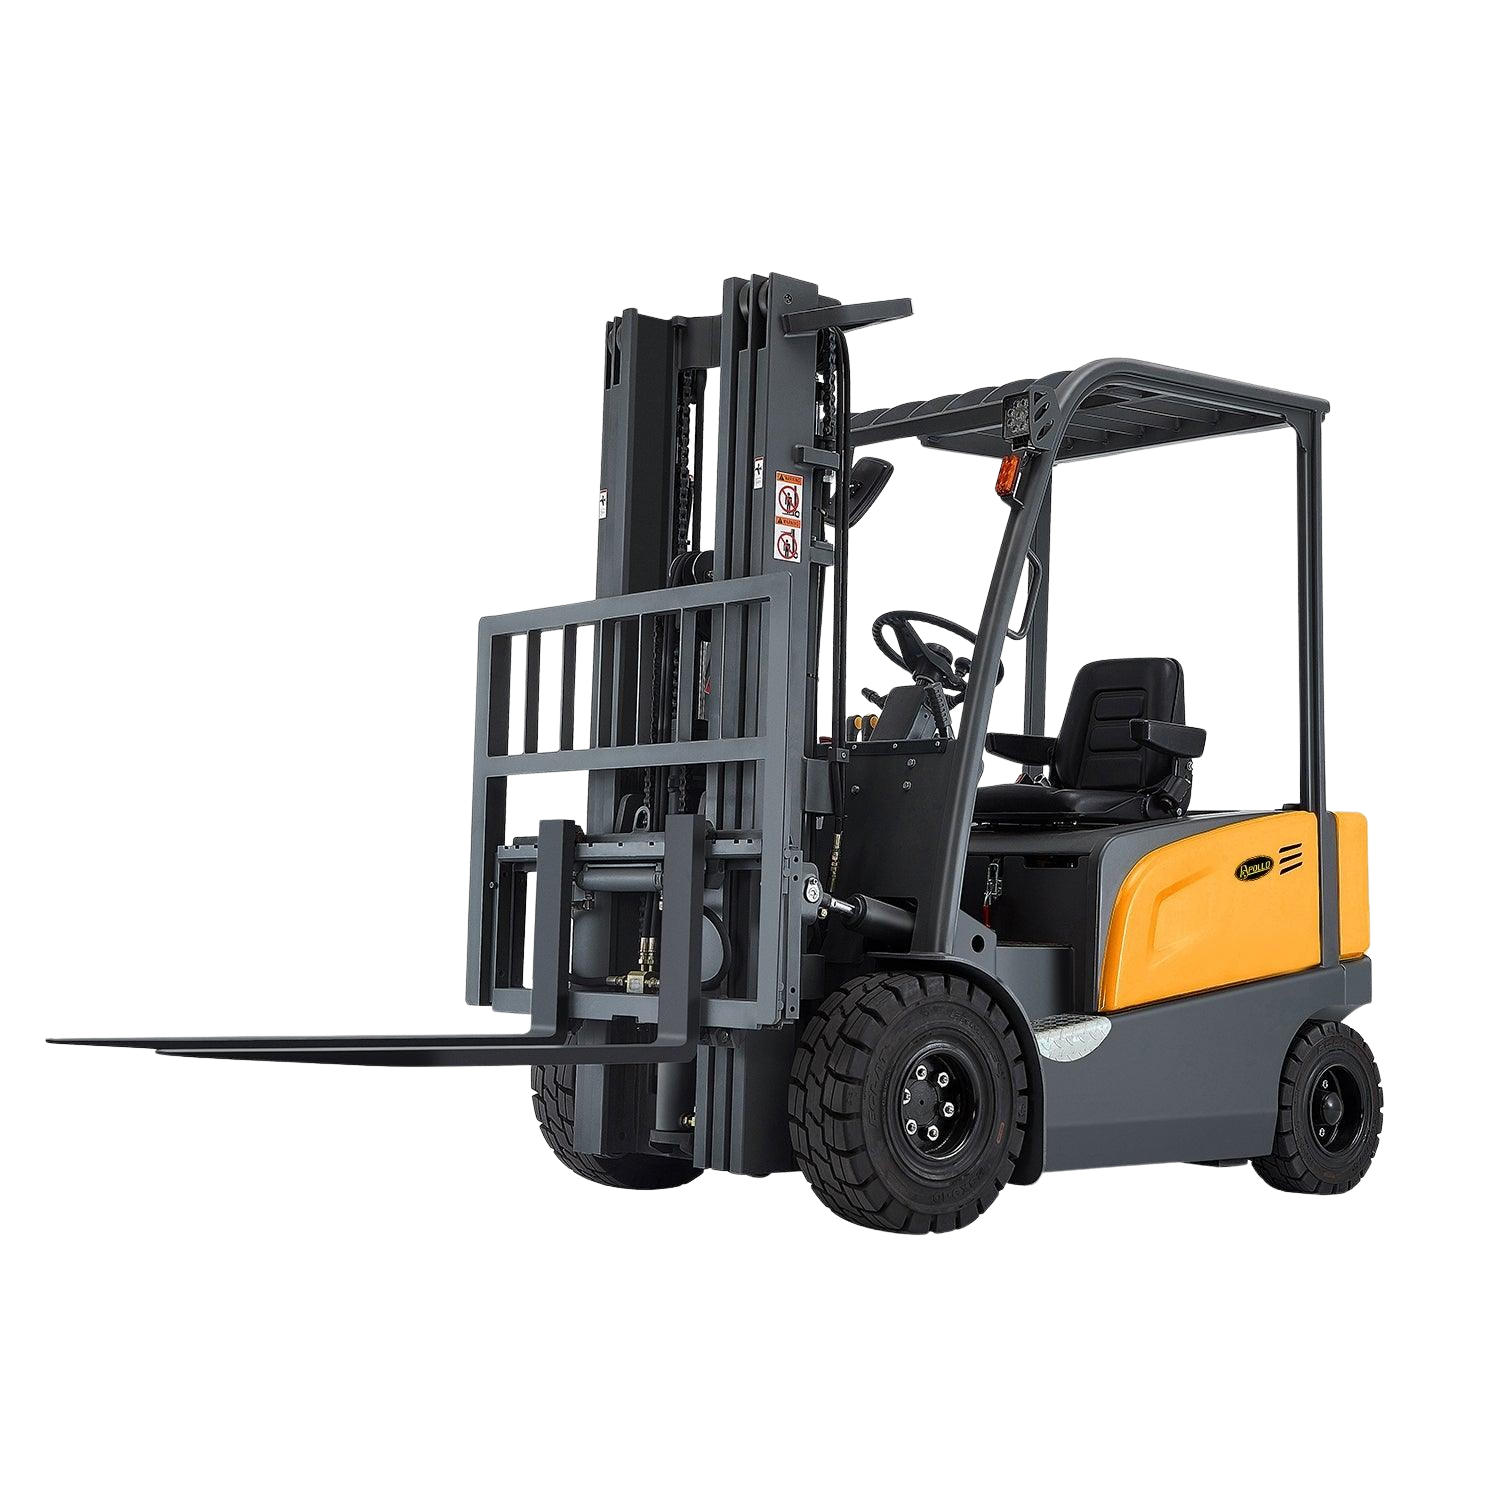 Apollolift, Apollolift A-4001 4 Wheel Electric Forklift 197" Lift 5500 lbs. Capacity New